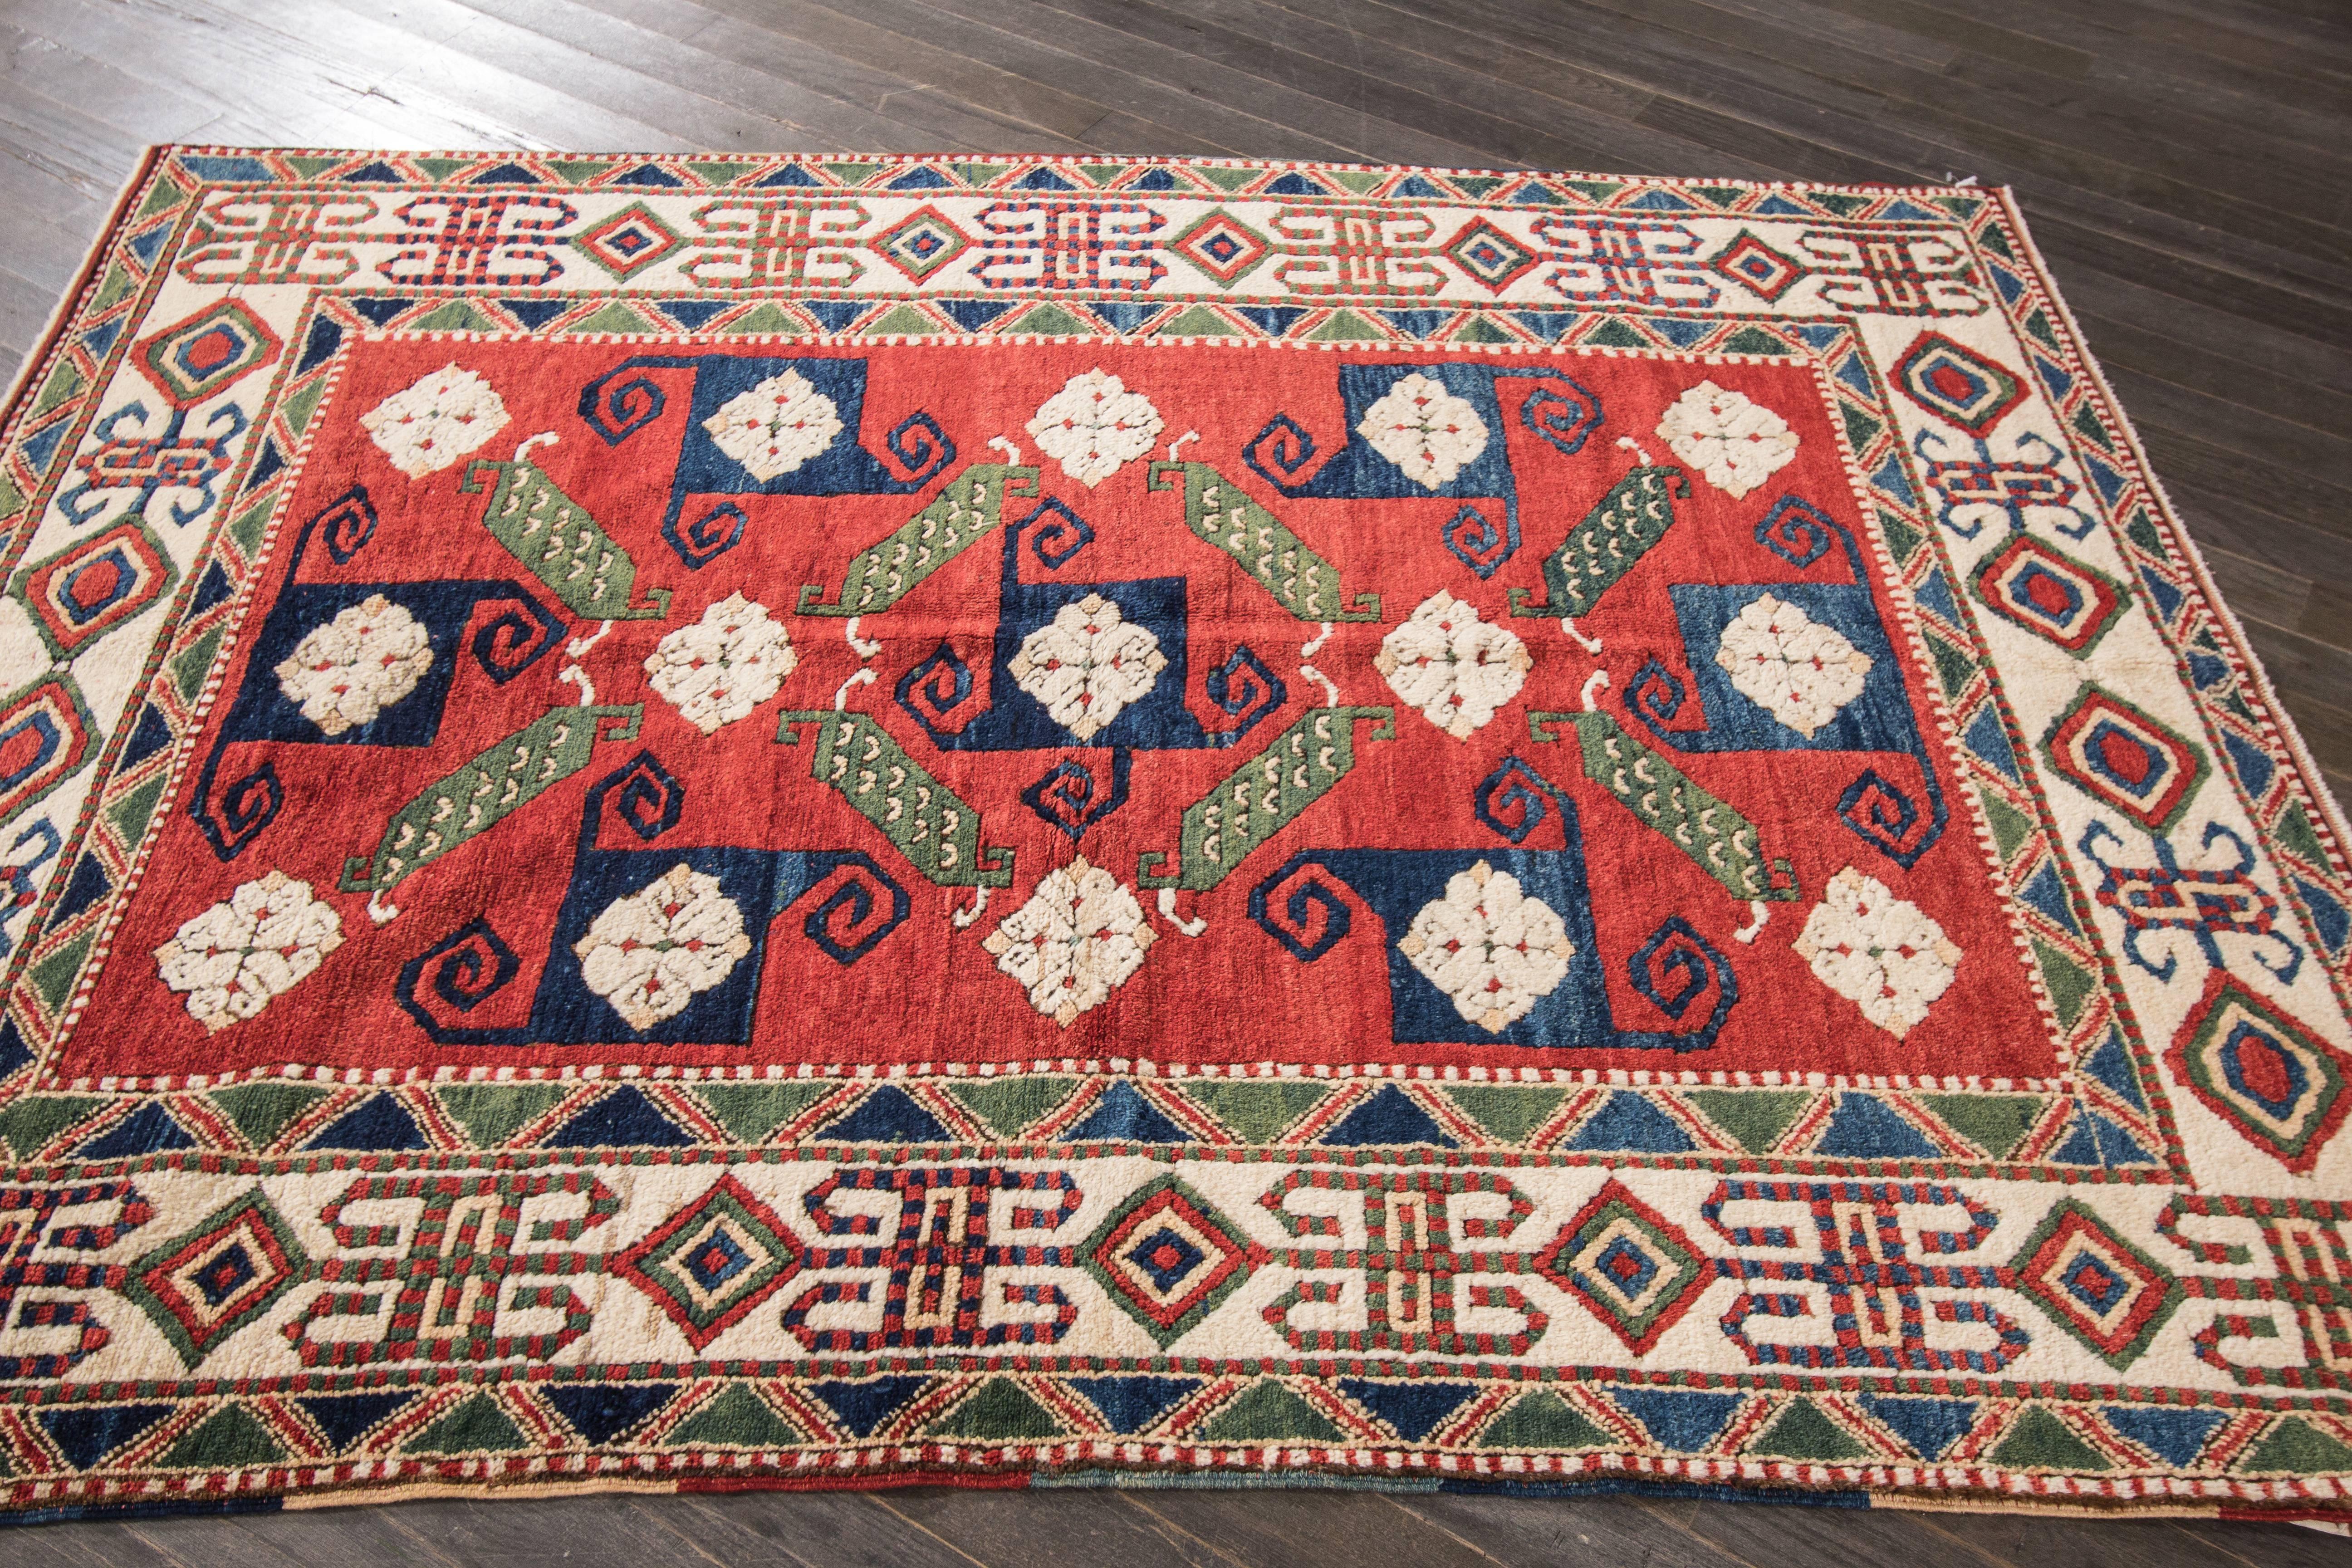 Vintage hand-knotted rug with a geometric and floral design on a red field with beige borders. Measures: 5'1